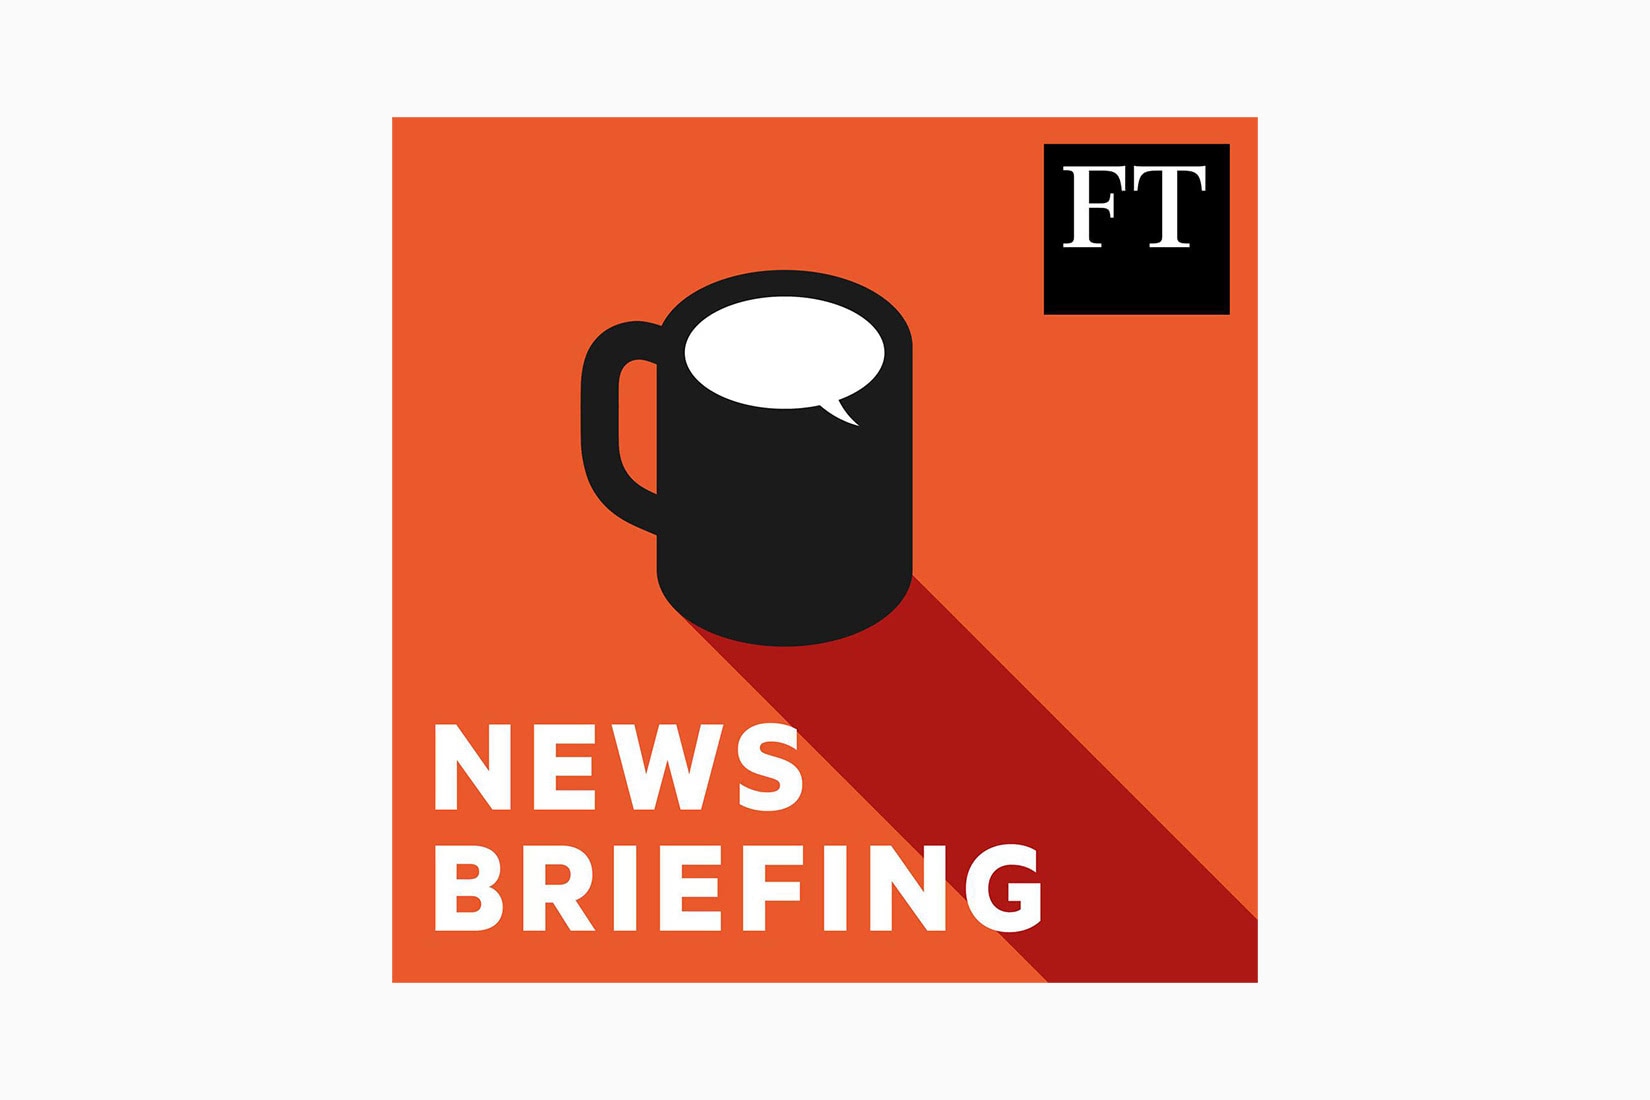 meilleurs podcasts ft news briefing financial times luxe digital